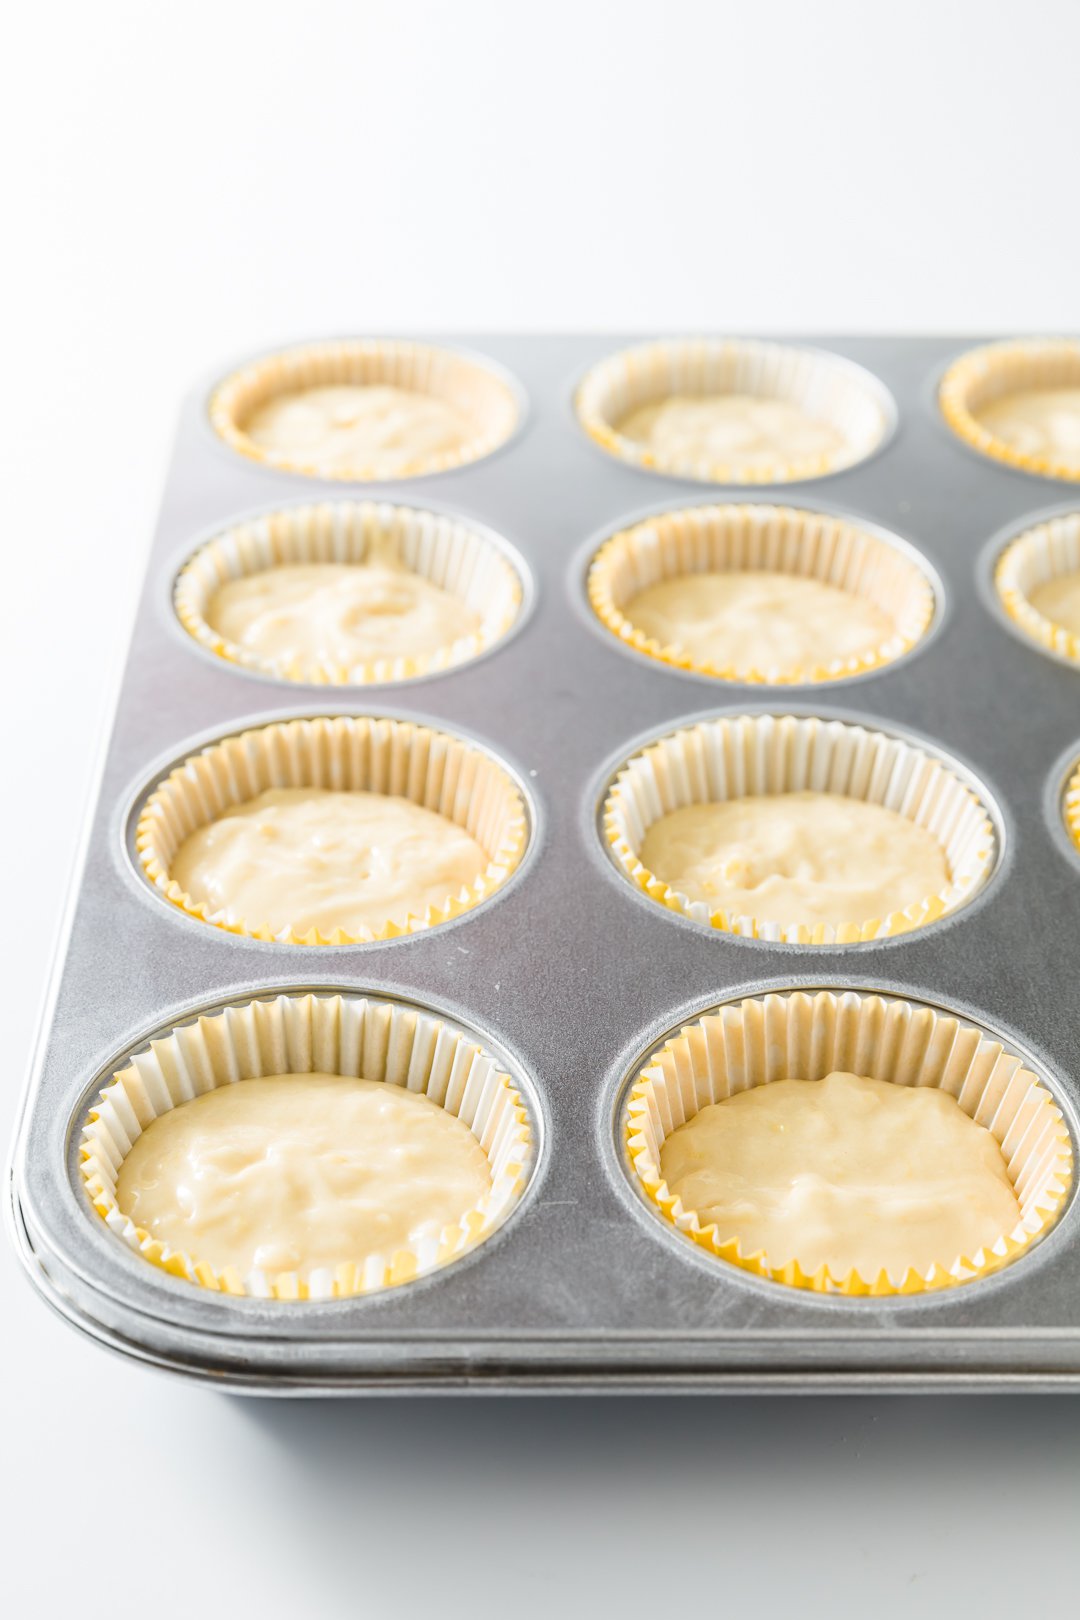 Lemon cupcakes ready to go into the oven